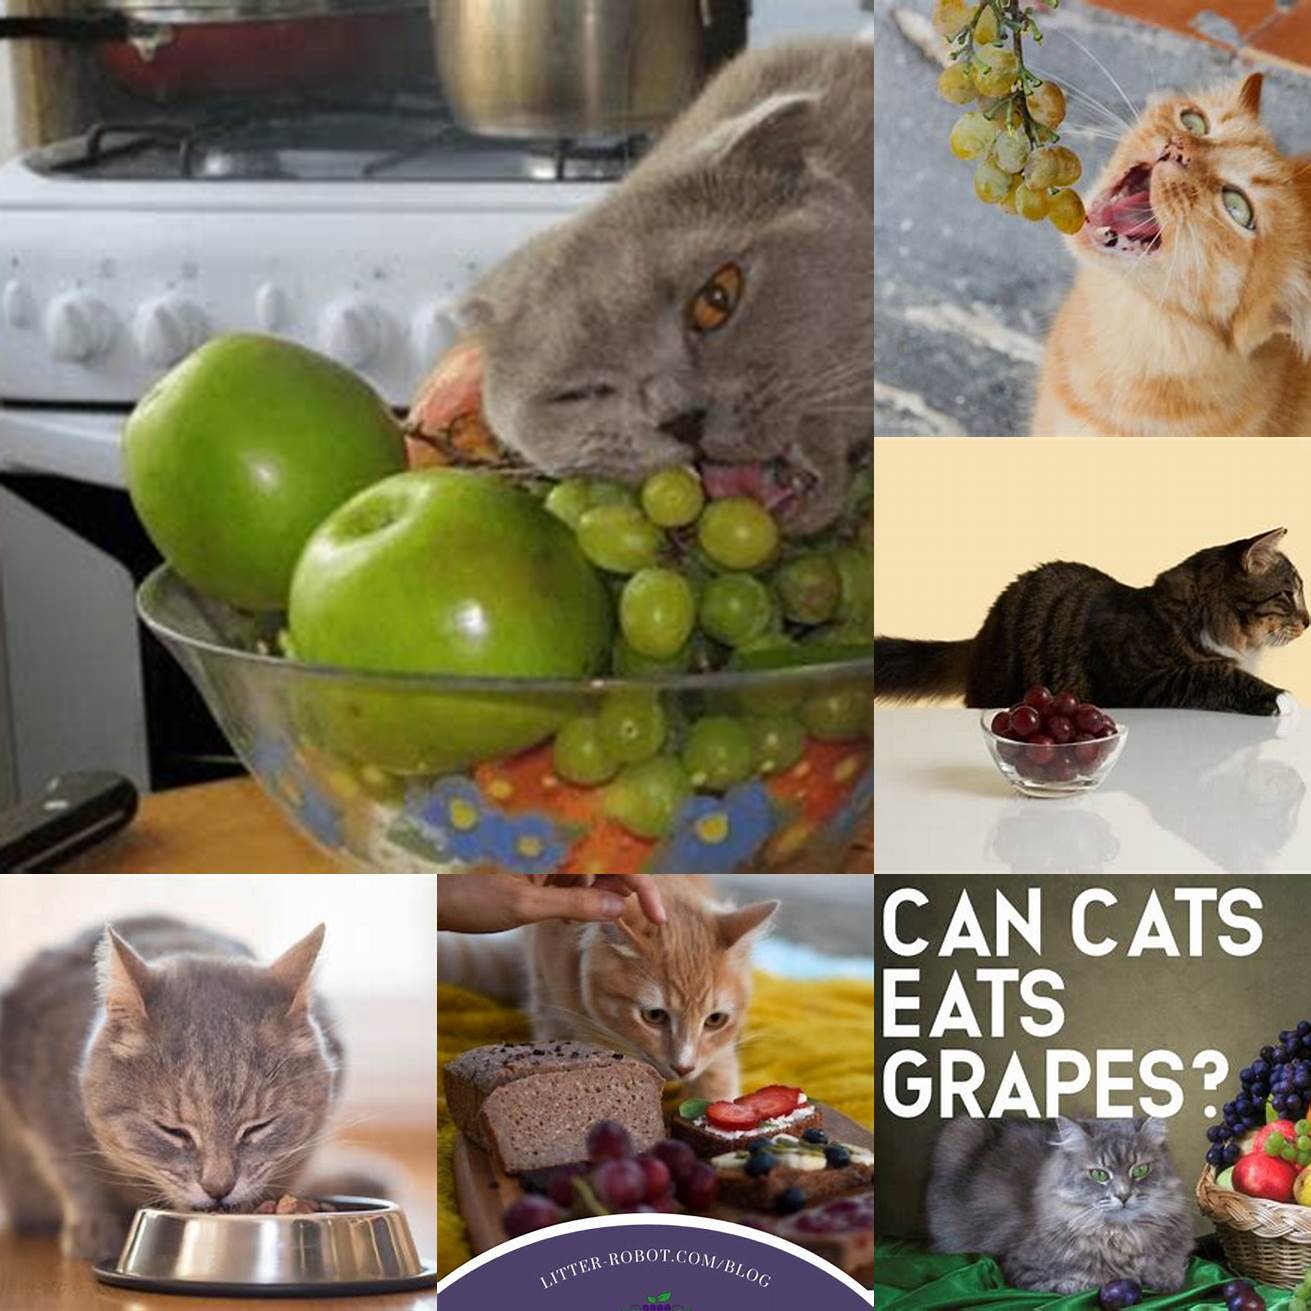 What happens if my cat eats grapes If your cat eats grapes or raisins they may experience symptoms such as vomiting diarrhea lethargy and decreased appetite If you suspect your cat has eaten grapes or raisins contact your veterinarian immediately Why are grapes and raisins toxic to cats The exact reason is not known but it is believed that the toxic substance is found in the flesh of the fruit and not just the seeds The toxic substance can cause kidney failure in cats What should I do if my cat eats grapes or raisins If you suspect your cat has ingested grapes or raisins contact your veterinarian immediately They may induce vomiting or recommend other treatment options Are there any fruits that cats can safely eat Yes there are some fruits that cats can safely eat in small amounts such as bananas blueberries and watermelon However it is important to always check with your veterinarian before giving your cat any new foods Can cats eat grape juice Grape juice should also be avoided as it can contain the same toxic substance as grapes and raisins What other foods should I avoid giving my cat Other foods that should be avoided include chocolate caffeine onions garlic and alcohol These foods can be toxic to cats and can cause serious health problems